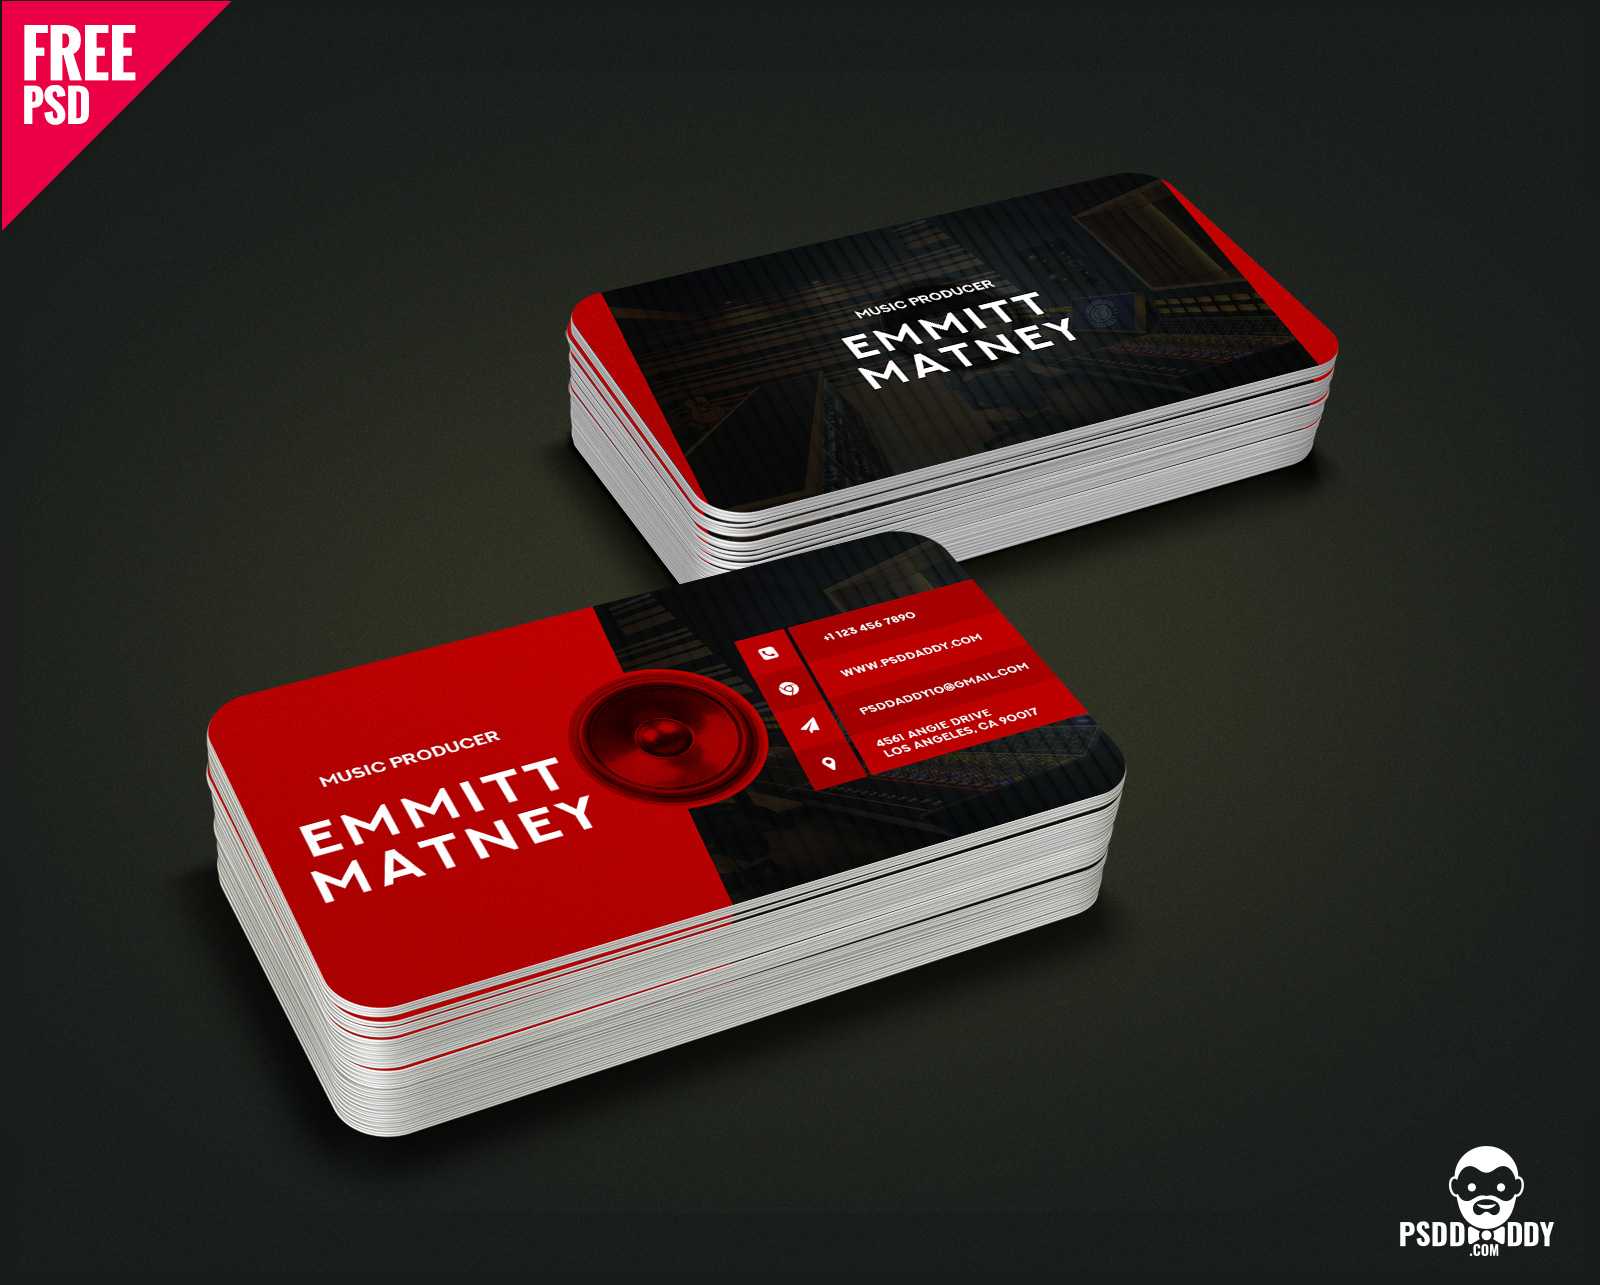 Download] Music Visiting Card Free Psd | Psddaddy Intended For Visiting Card Template Psd Free Download